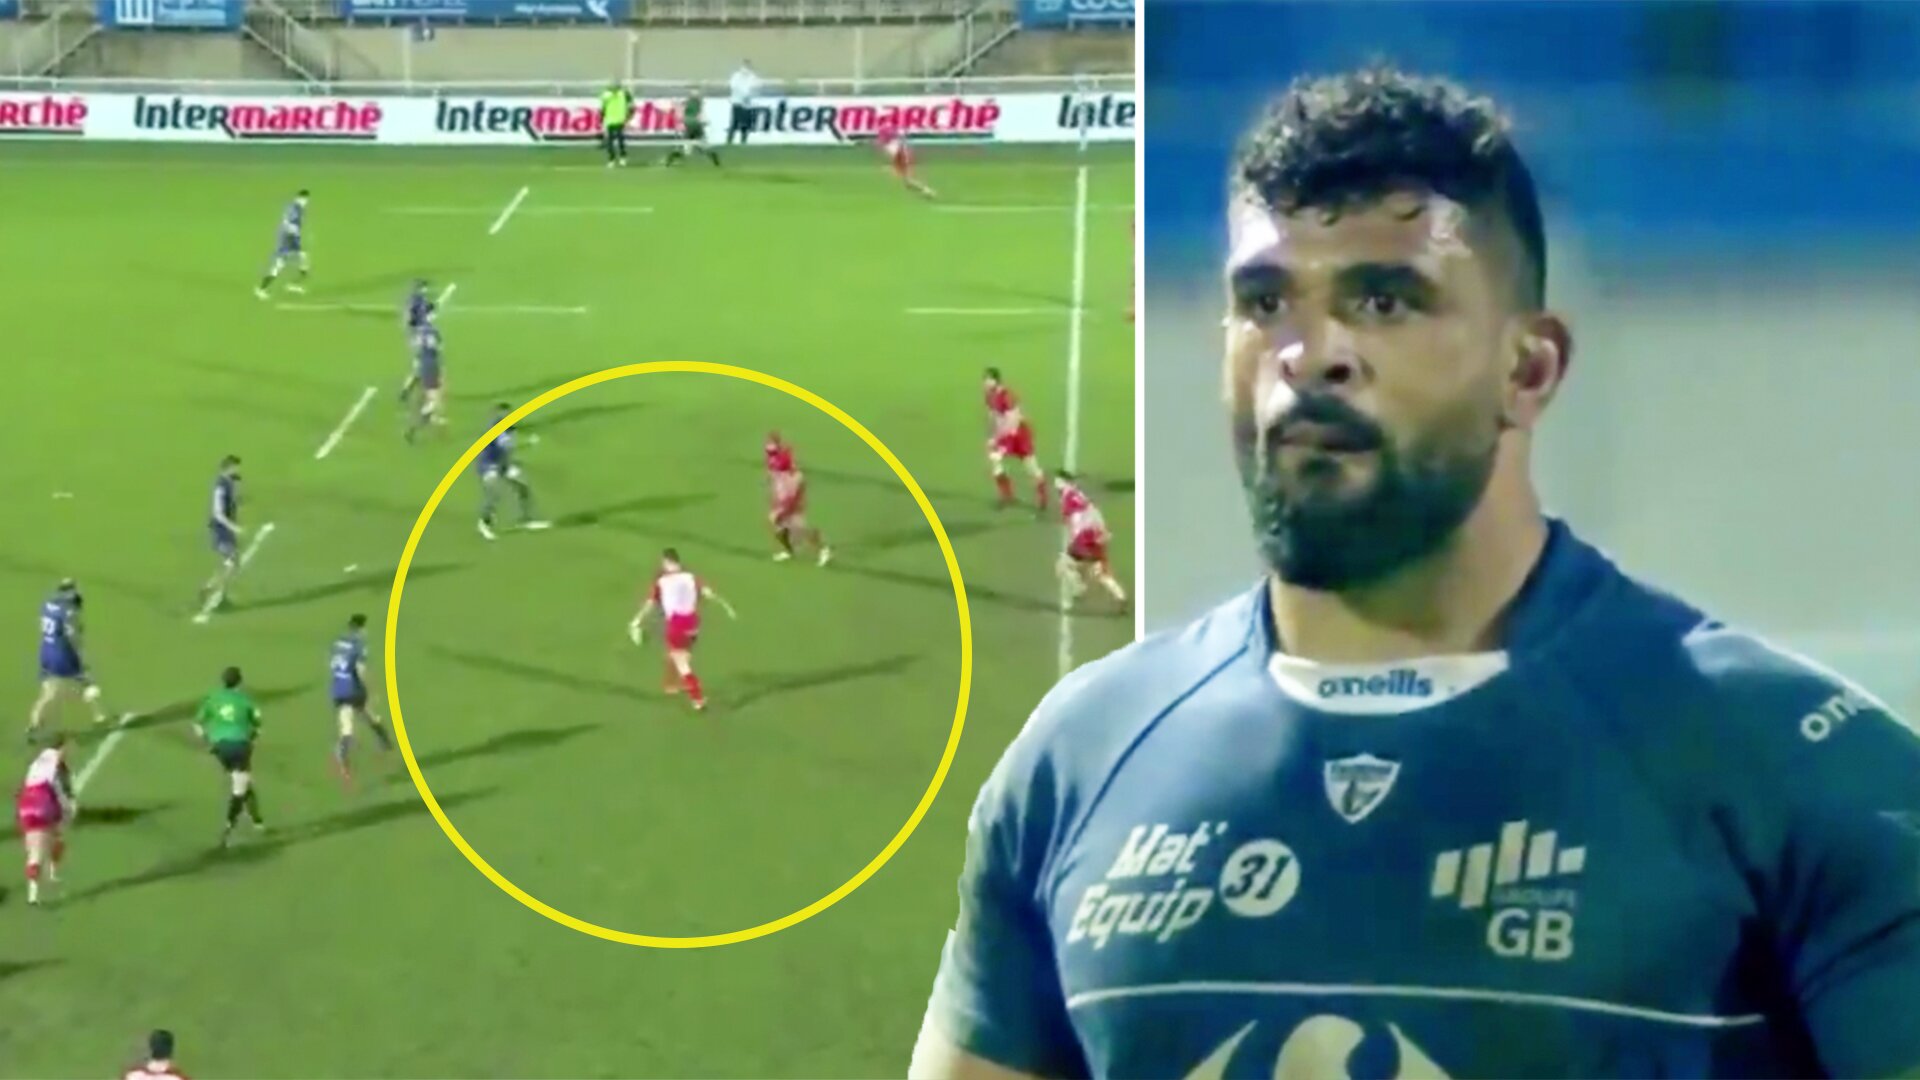 The insane last play try that everyone is talking about from last night's French PROD2